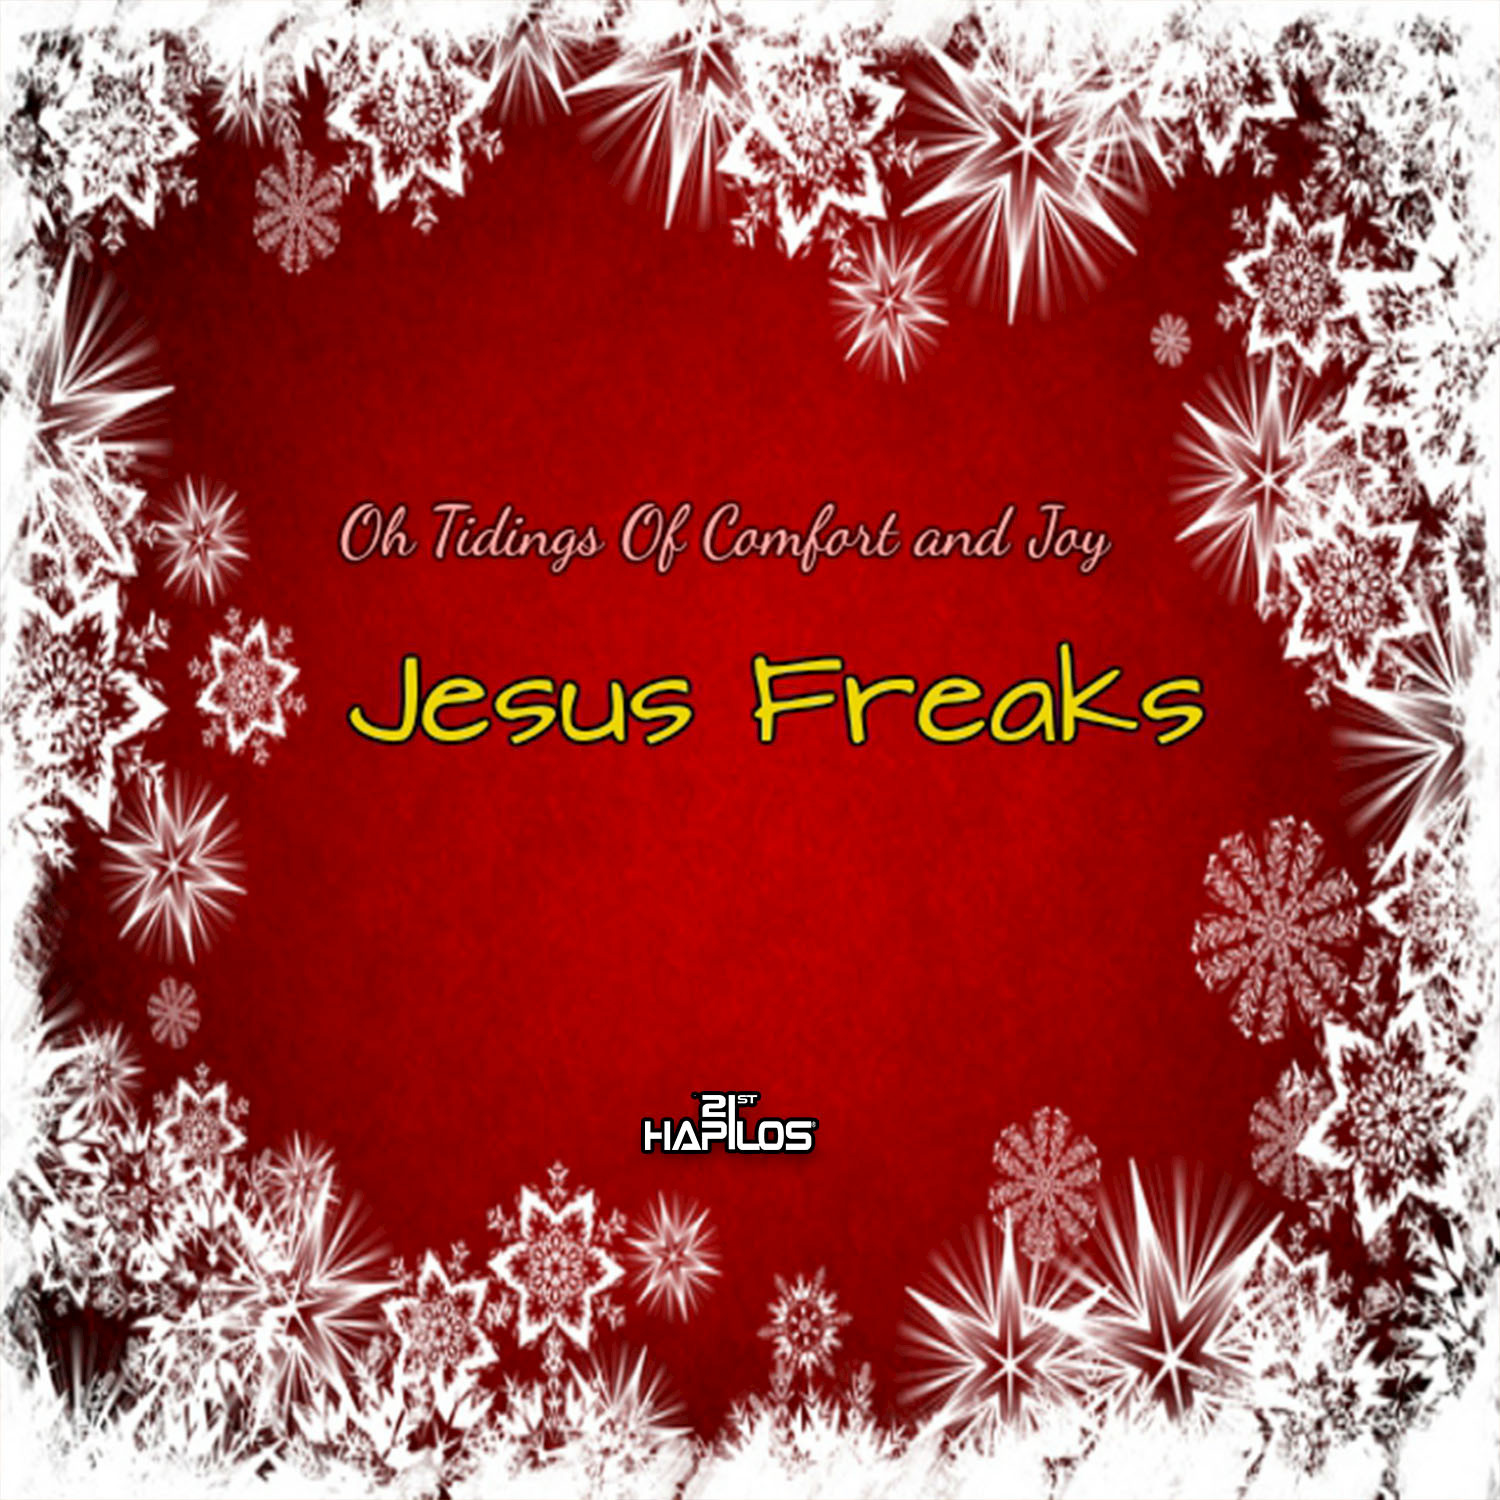 Oh Tidings Of Comfort and Joy - Single